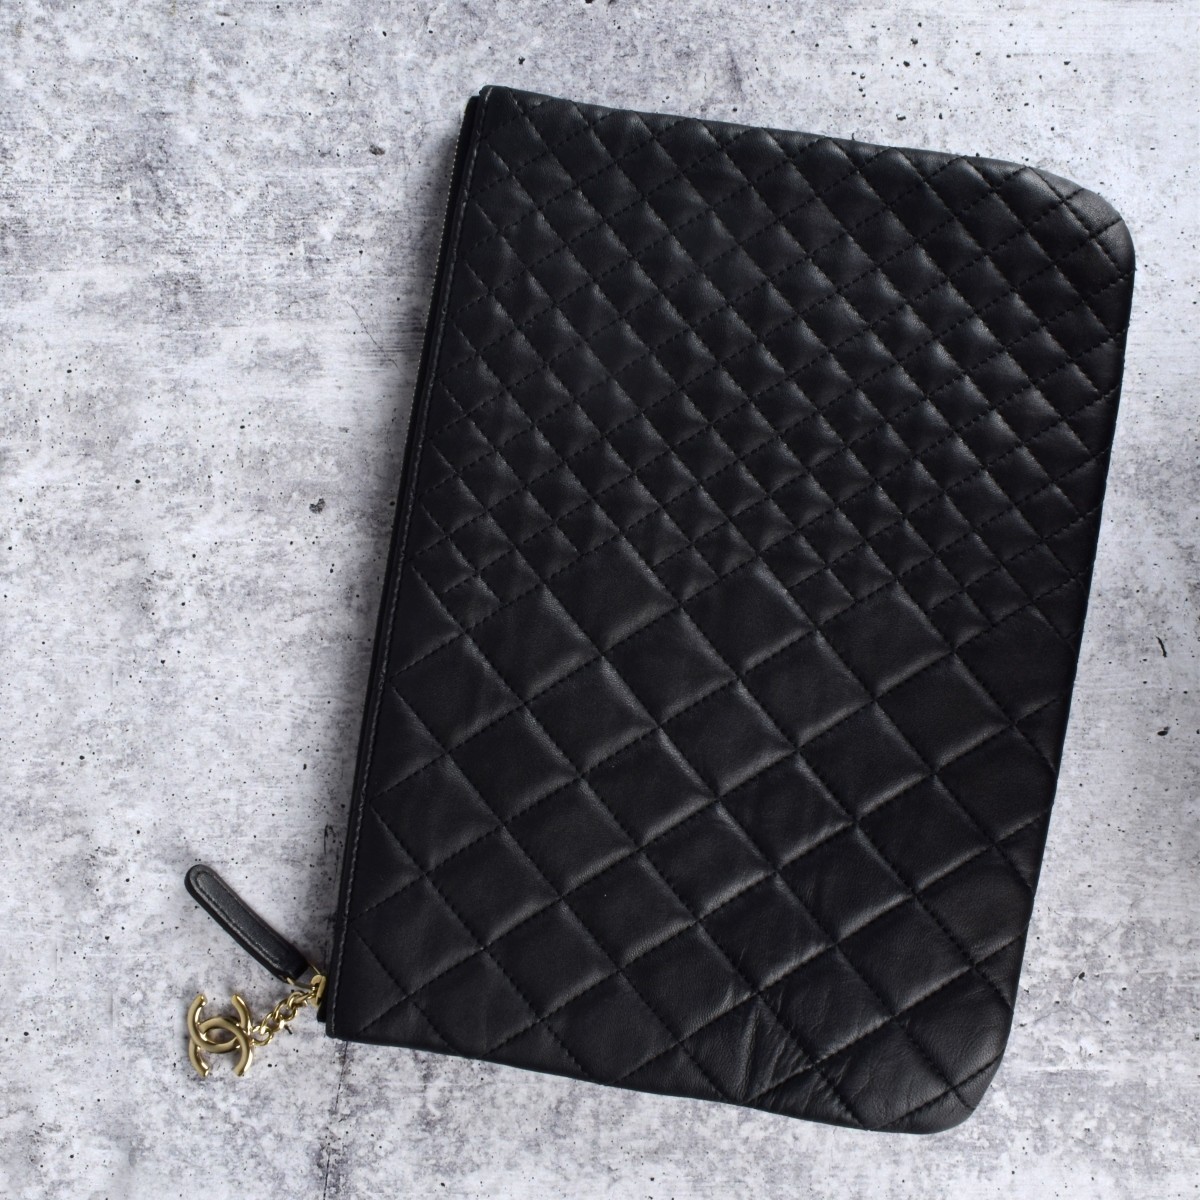 Chanel Black Quilted Clutch